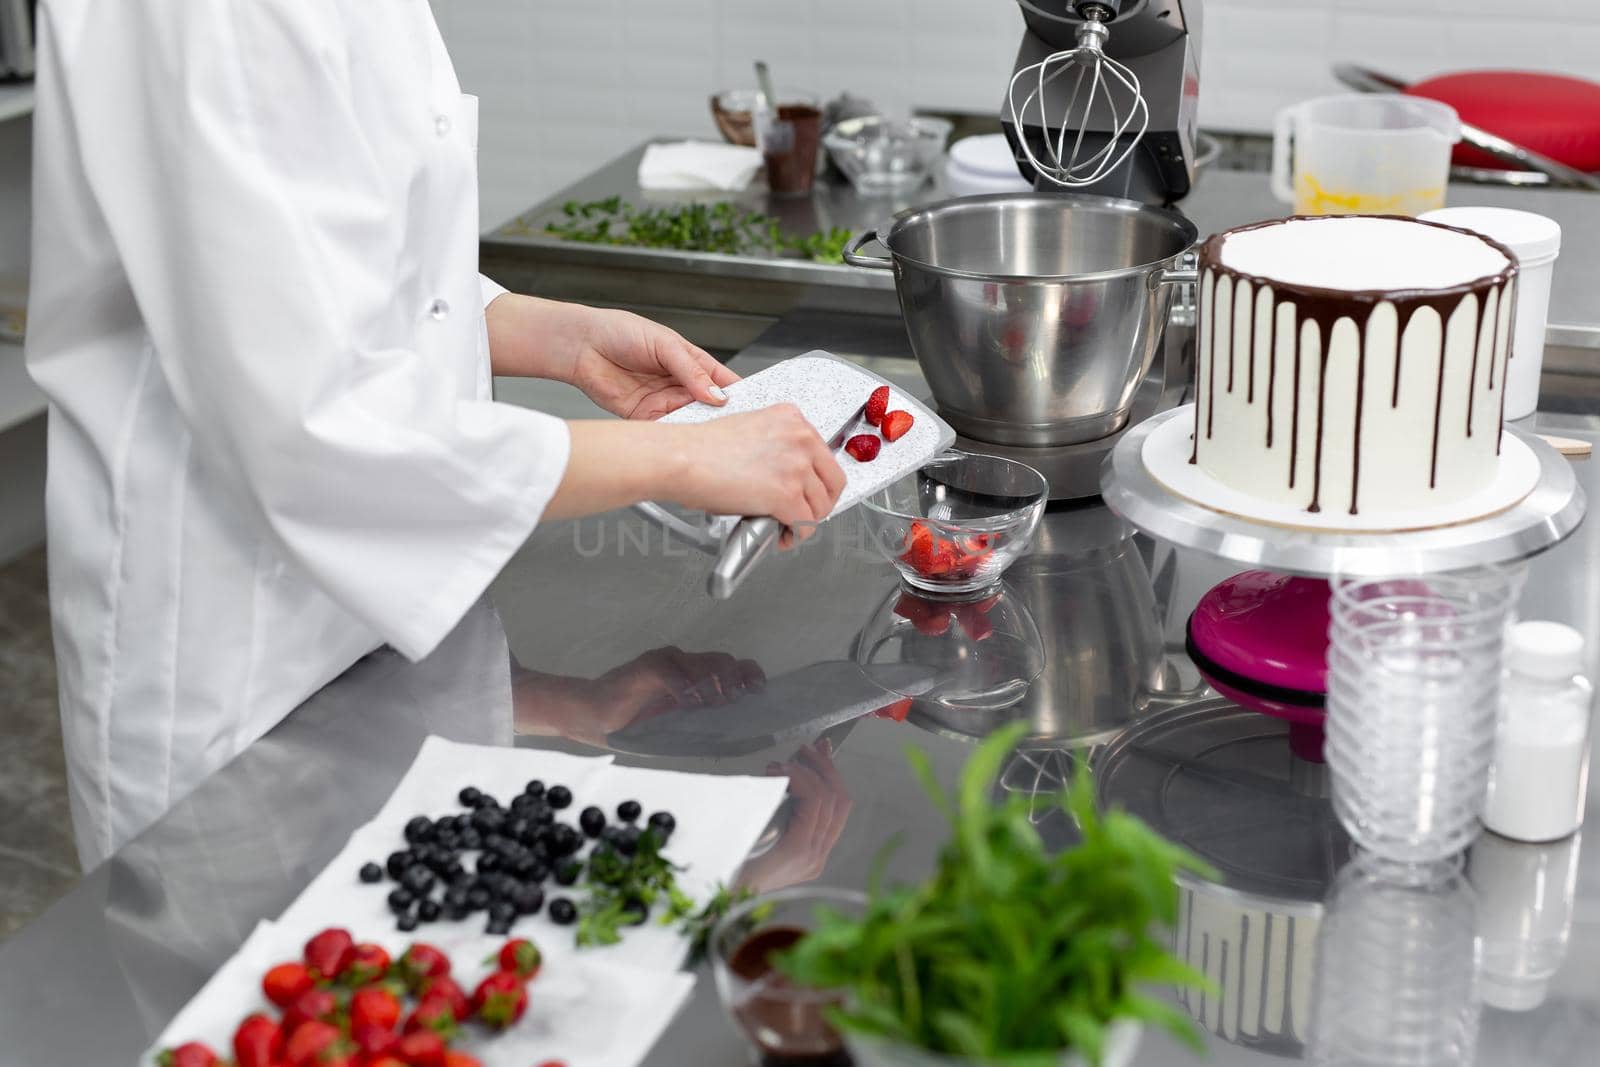 Pastry chef cuts strawberries to decorate the cake. by StudioPeace